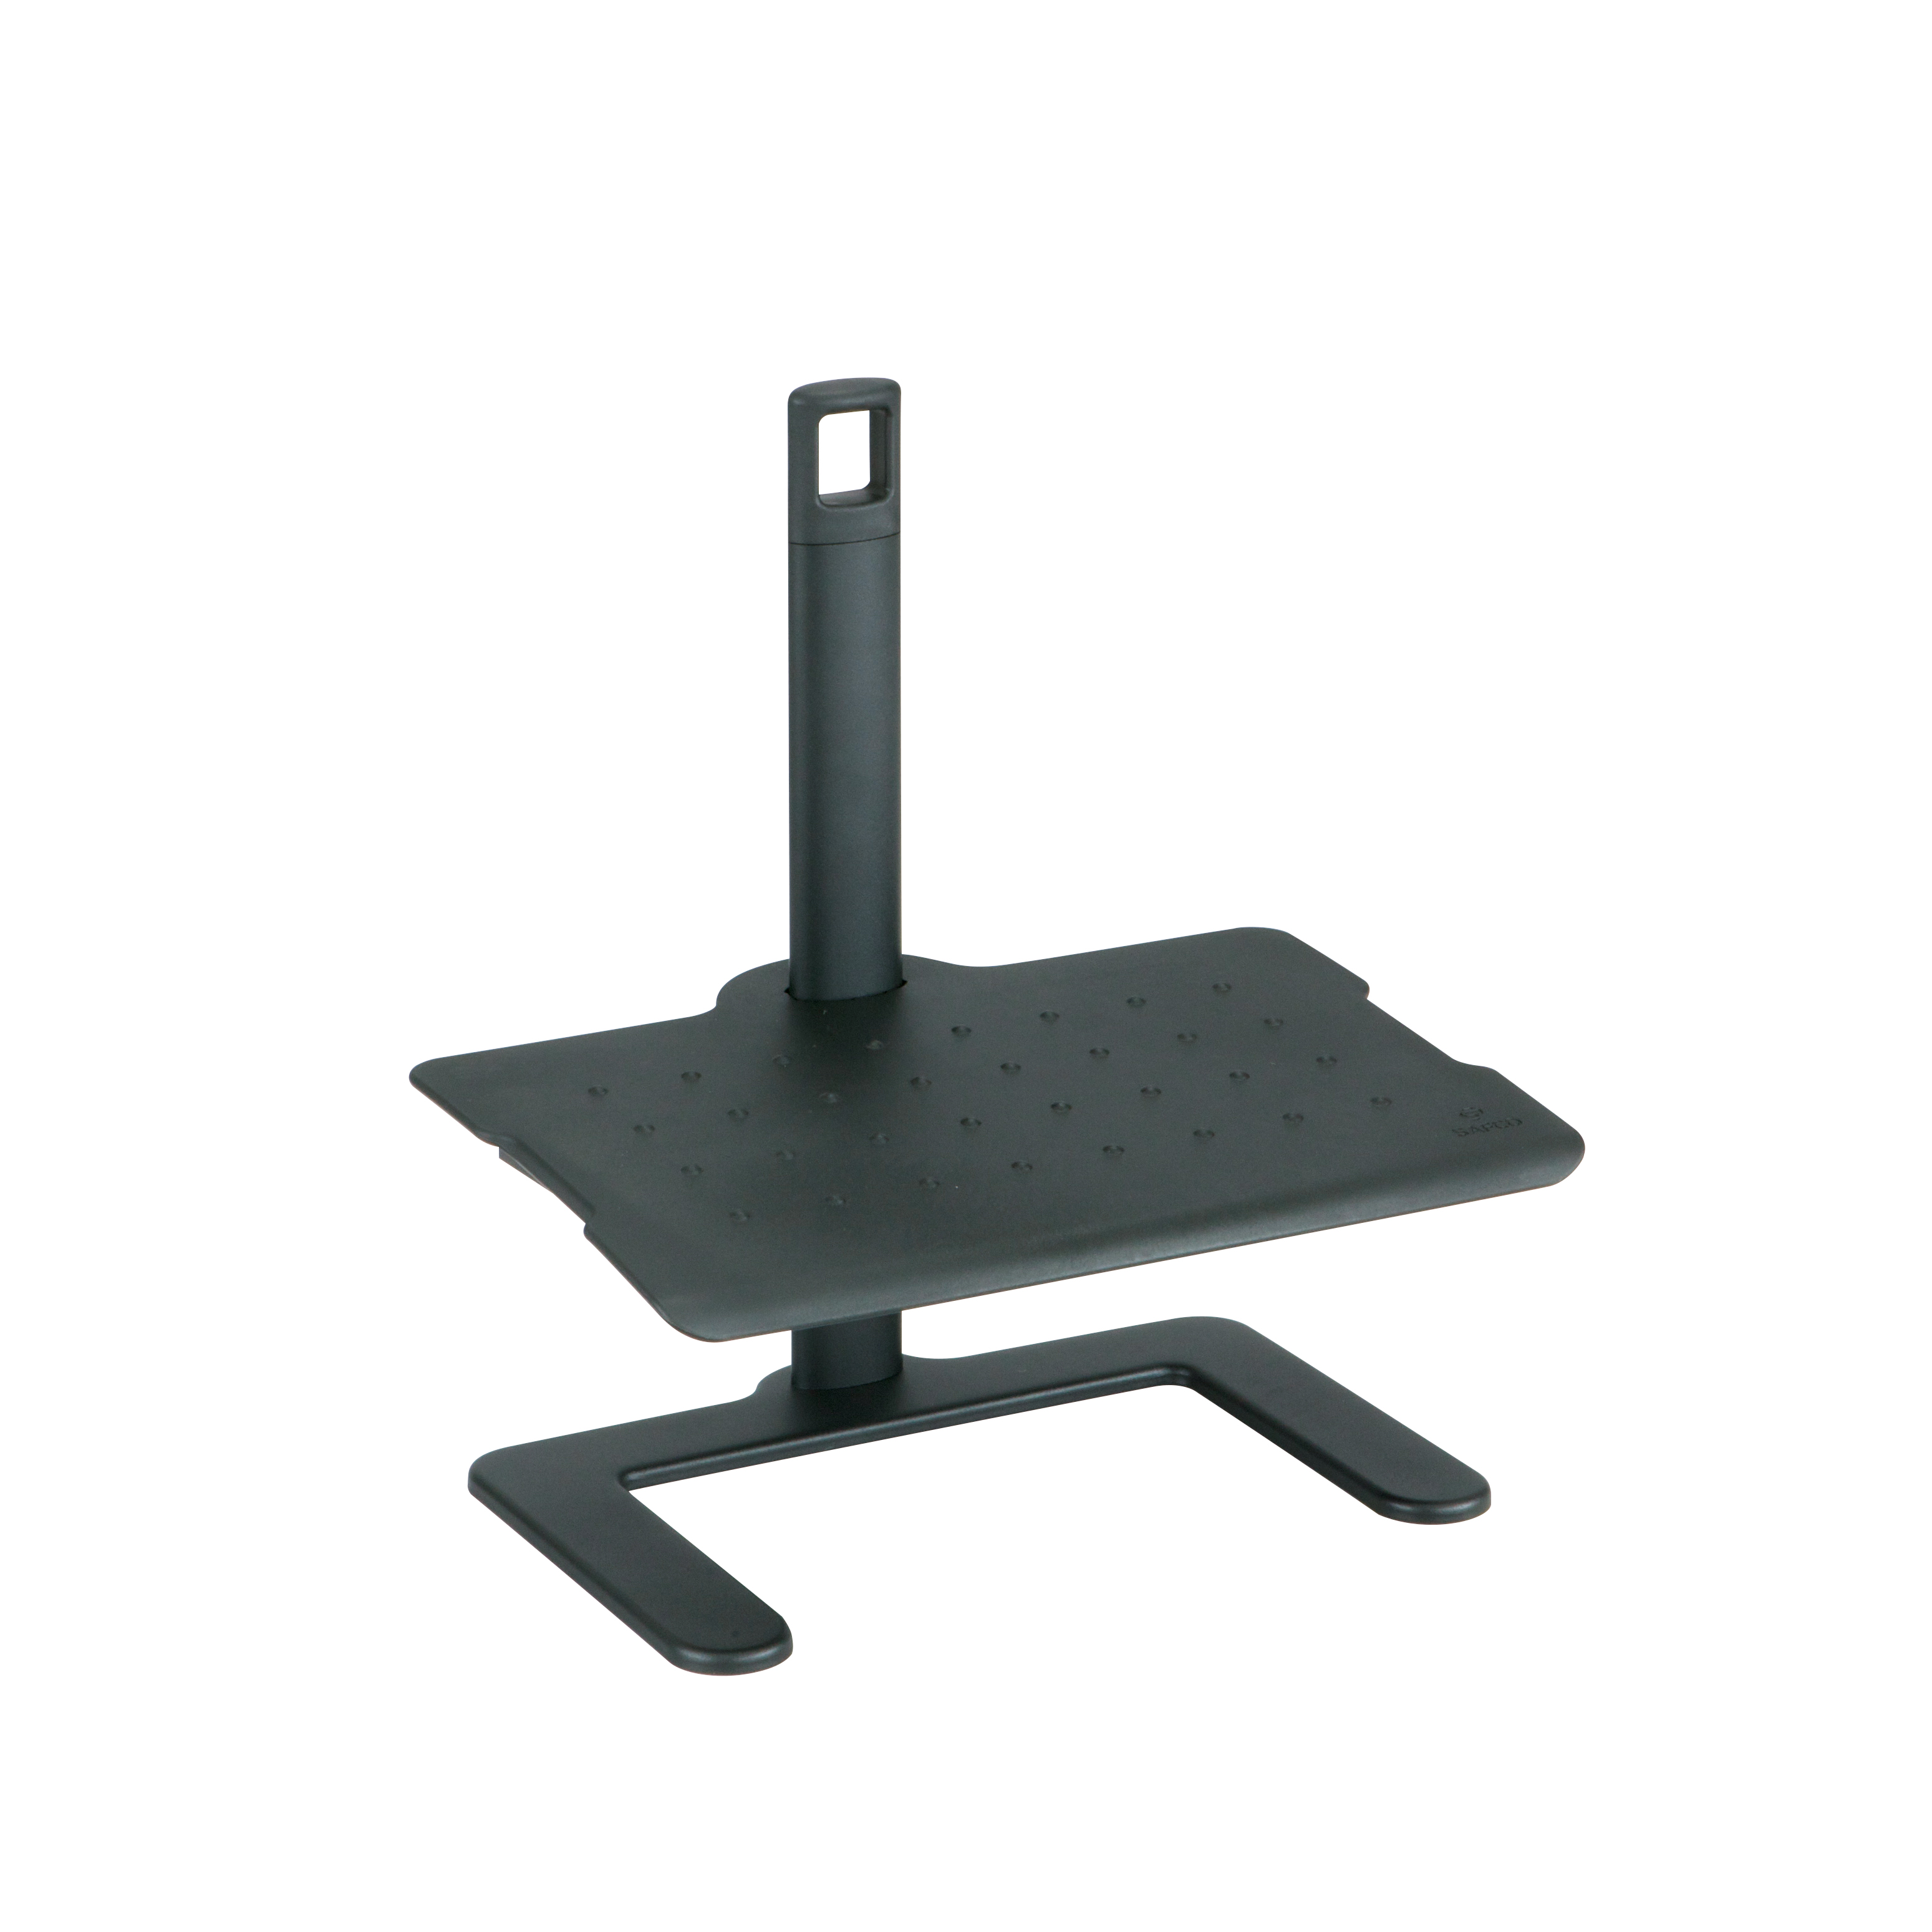 Adjustable footrest and Foot stool